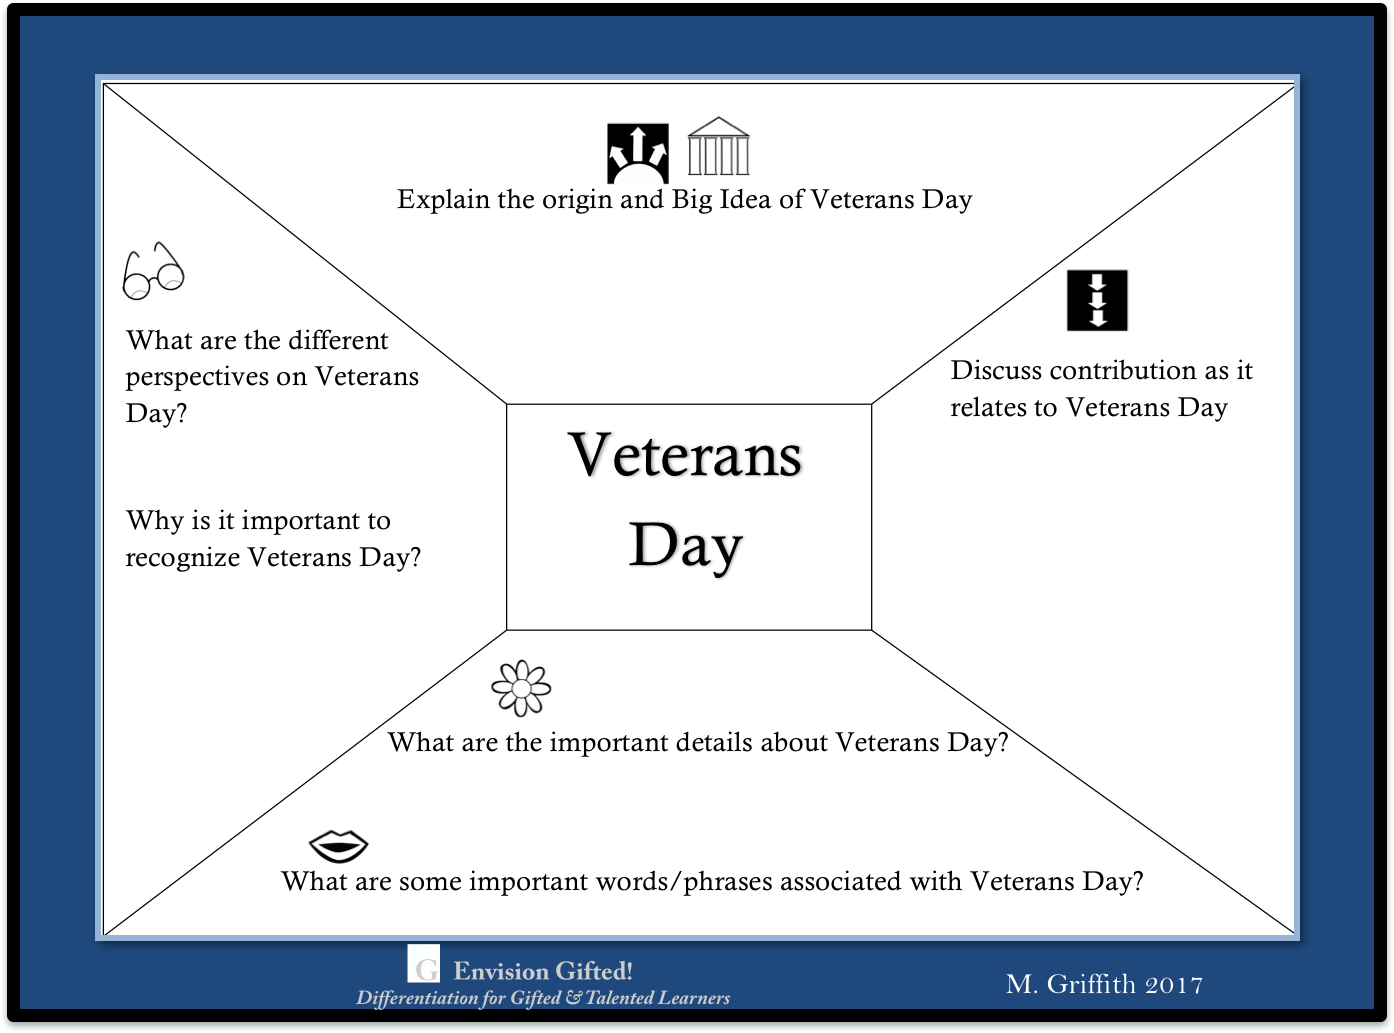 New! Envision Gifted. Veterans Day Frame